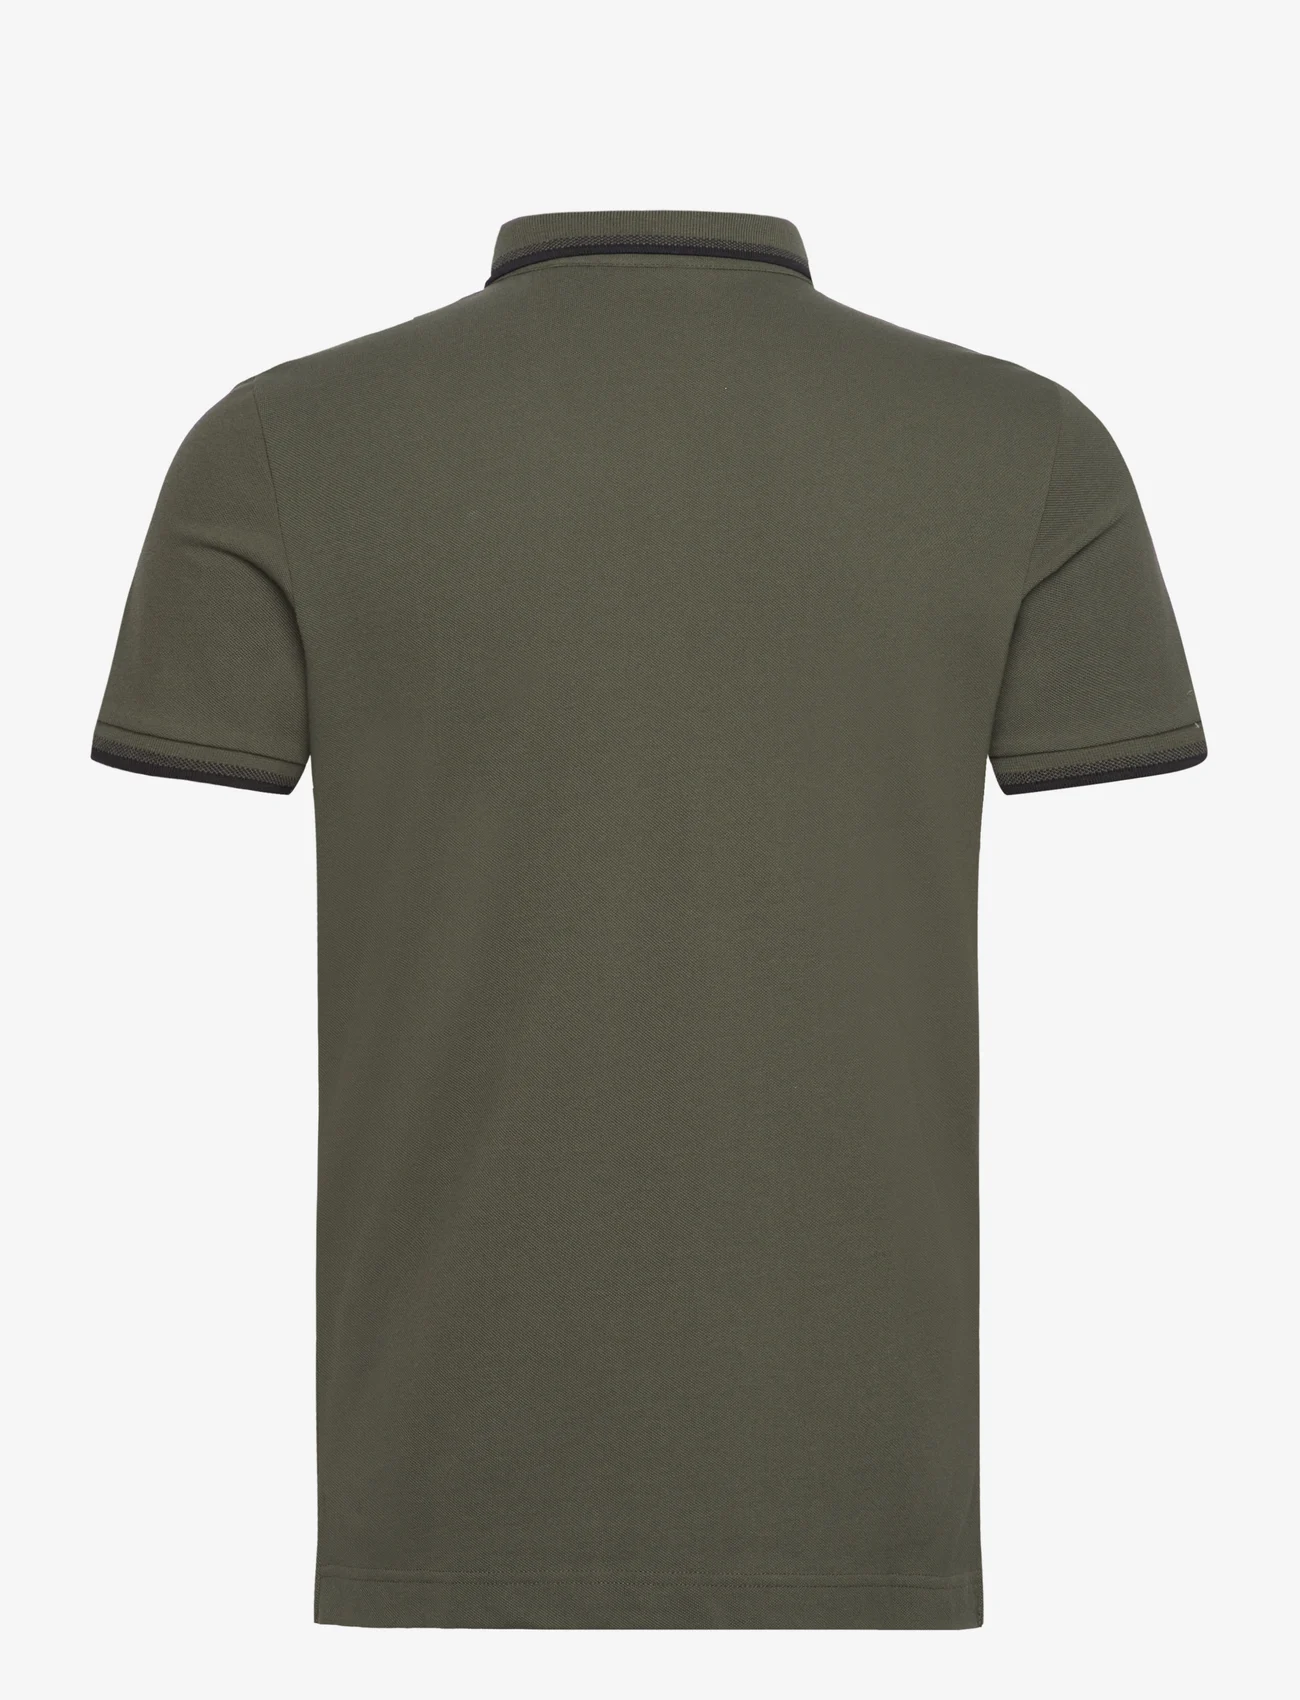 Superdry - SPORTSWEAR RELAXED TIPPED POLO - kortærmede poloer - army khaki - 1